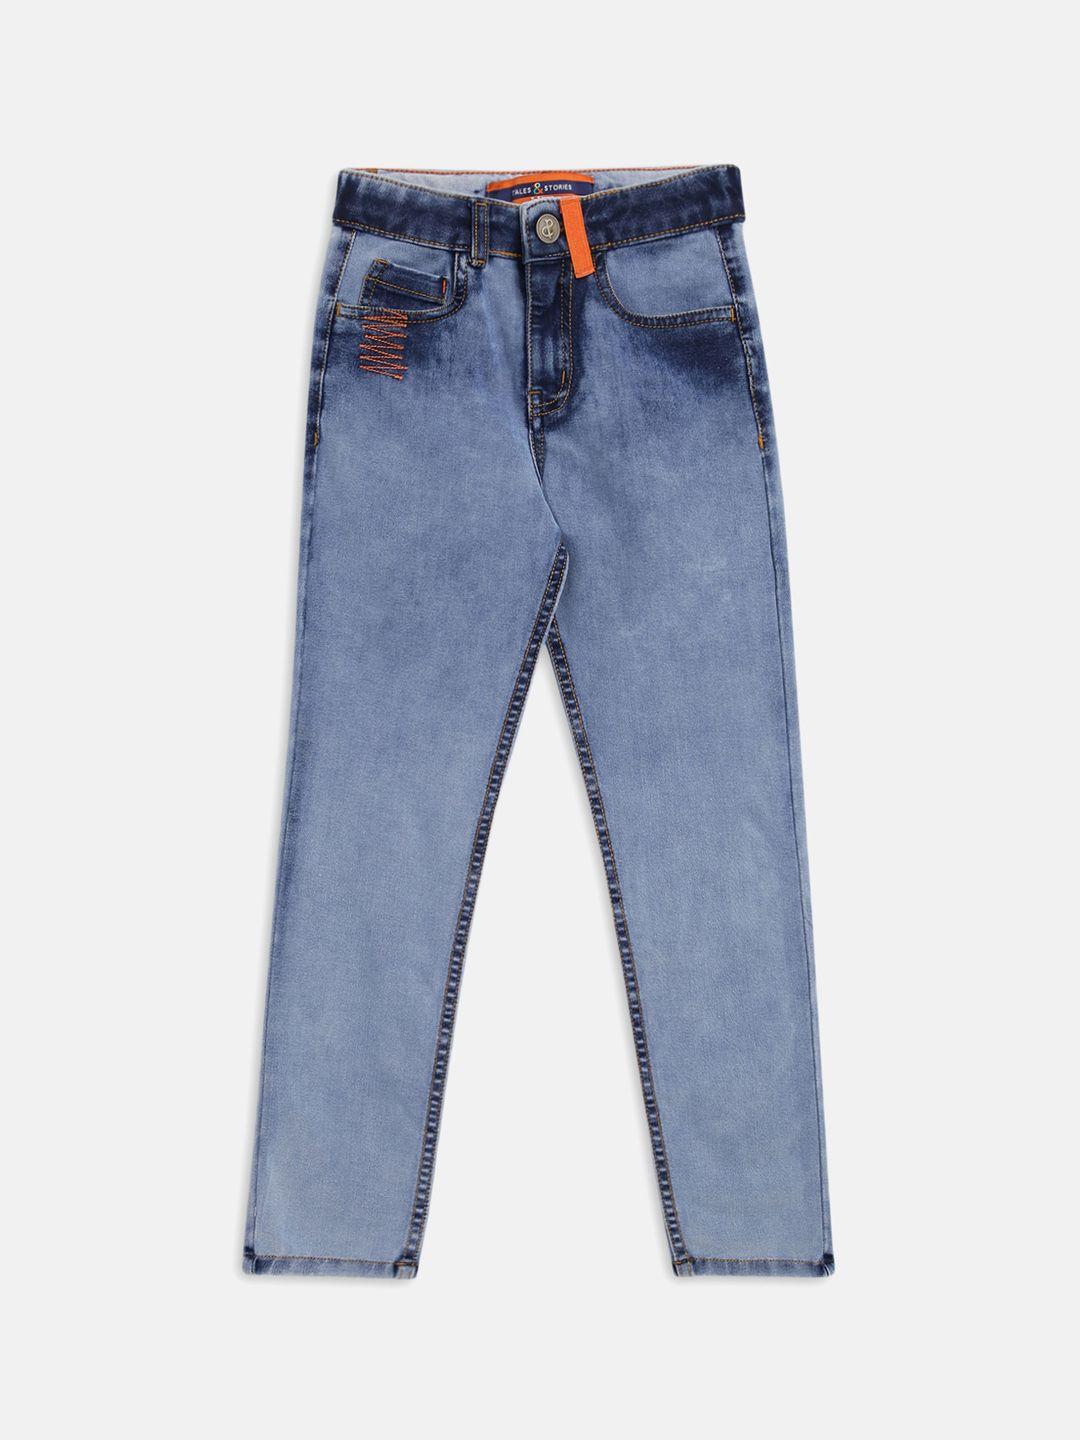 tales-&-stories-boys-slim-fit-clean-look-heavy-fade-stretchable-jeans